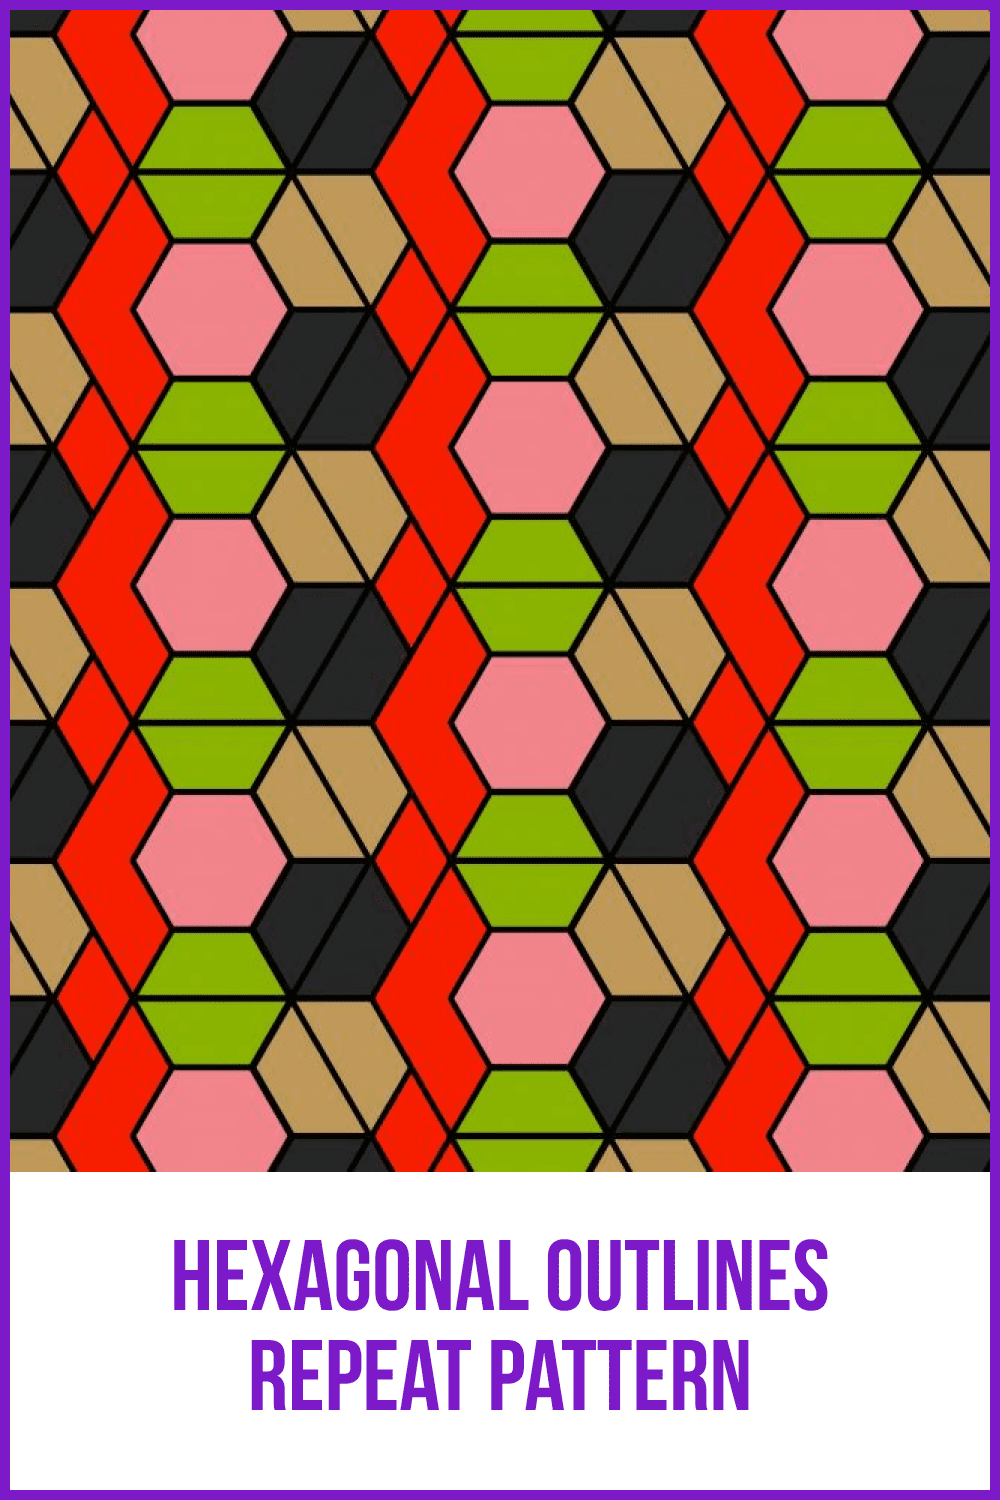 Very bright and colorful hexagons. They resemble vintage windows.